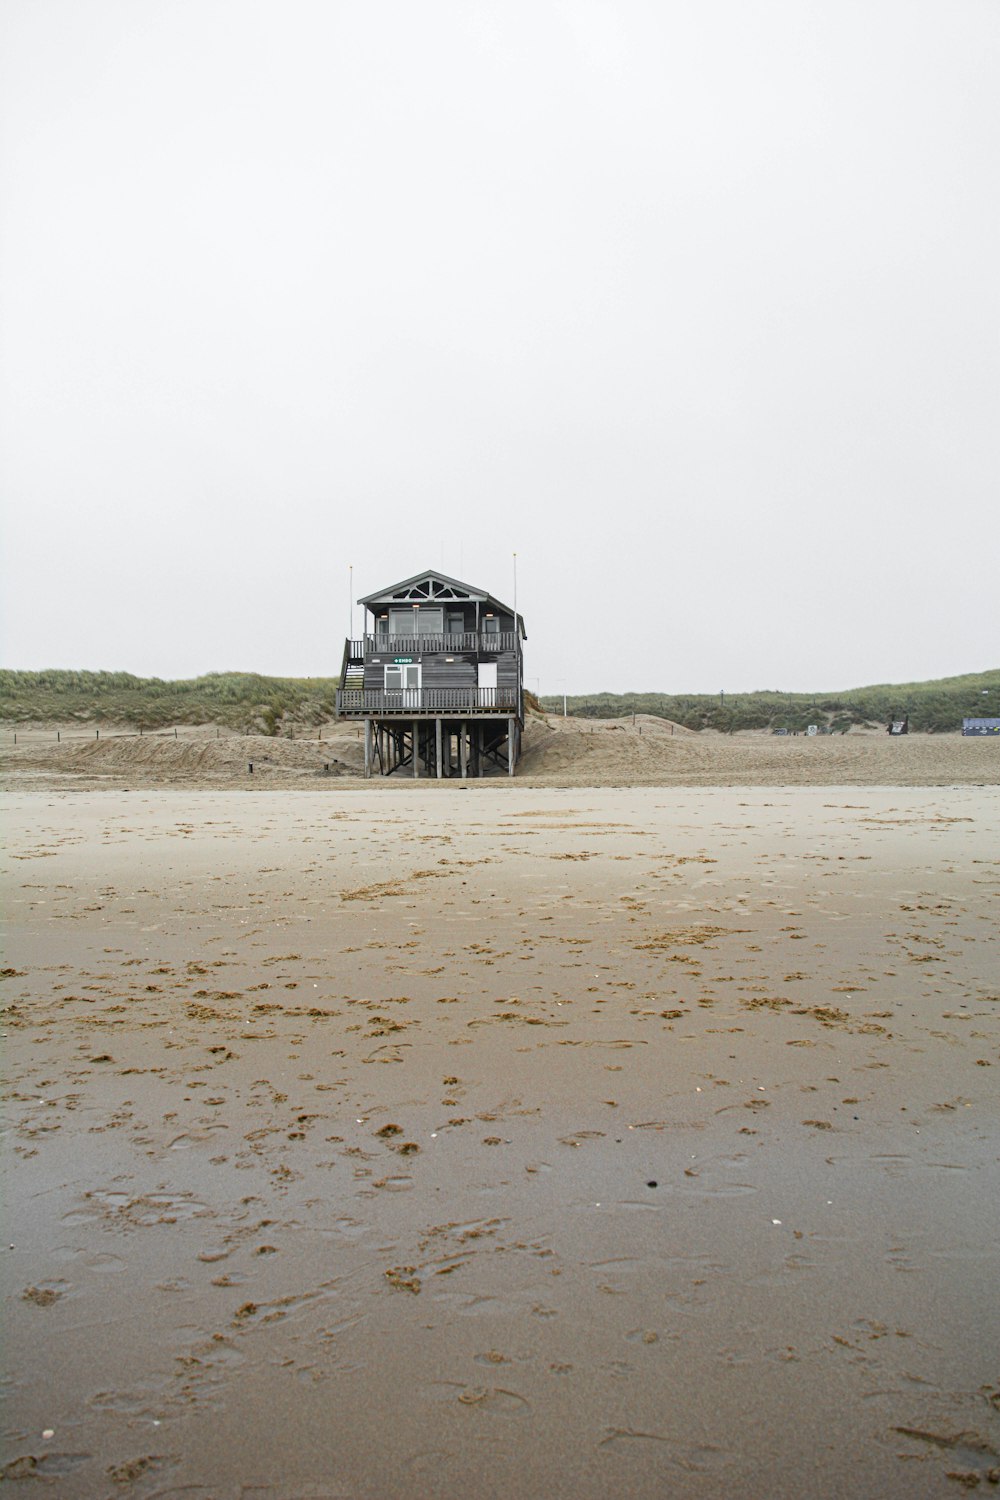 green wooden house on brown sand near body of water during daytime